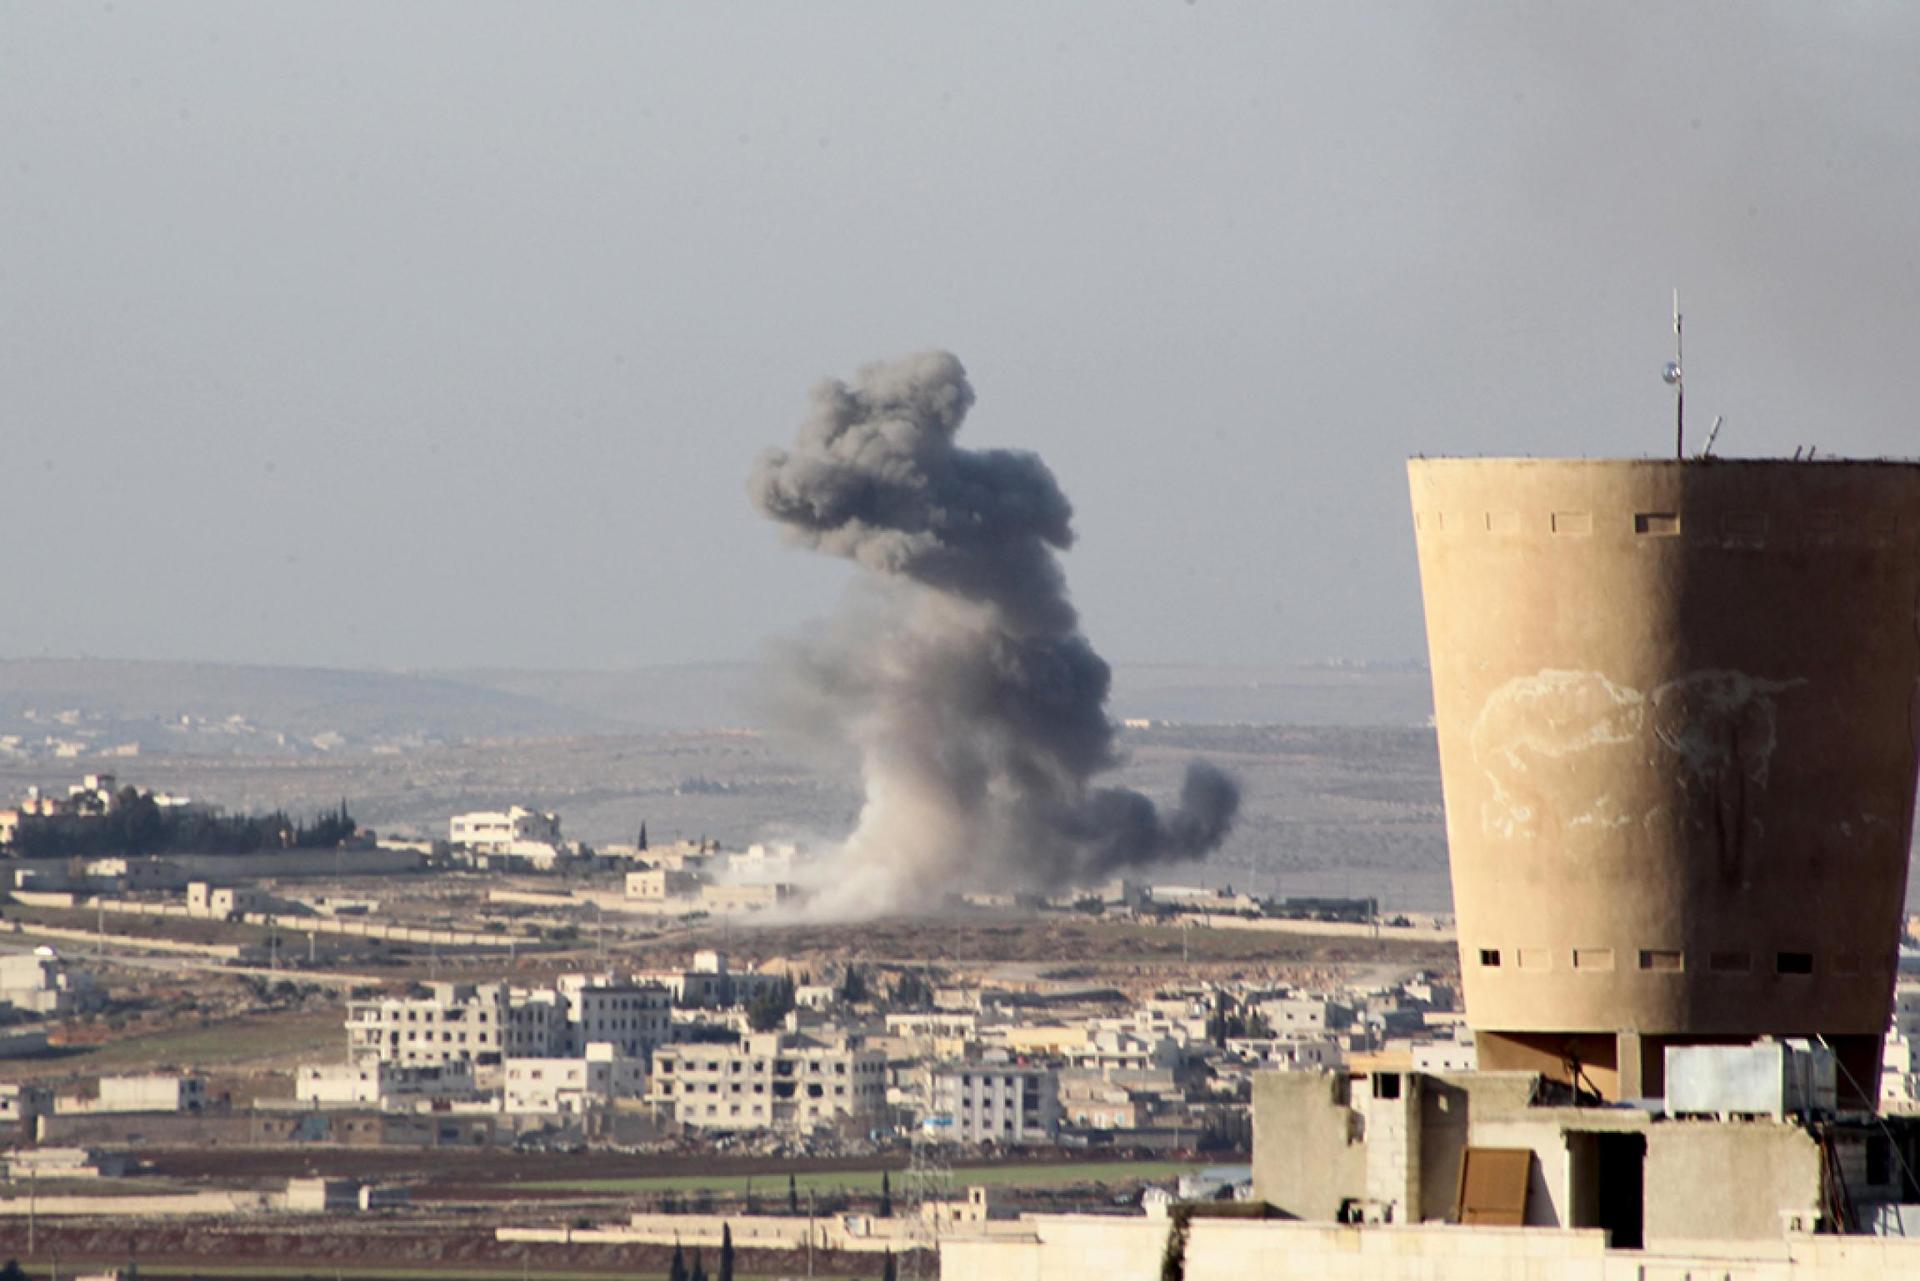 An airstrike in Syria